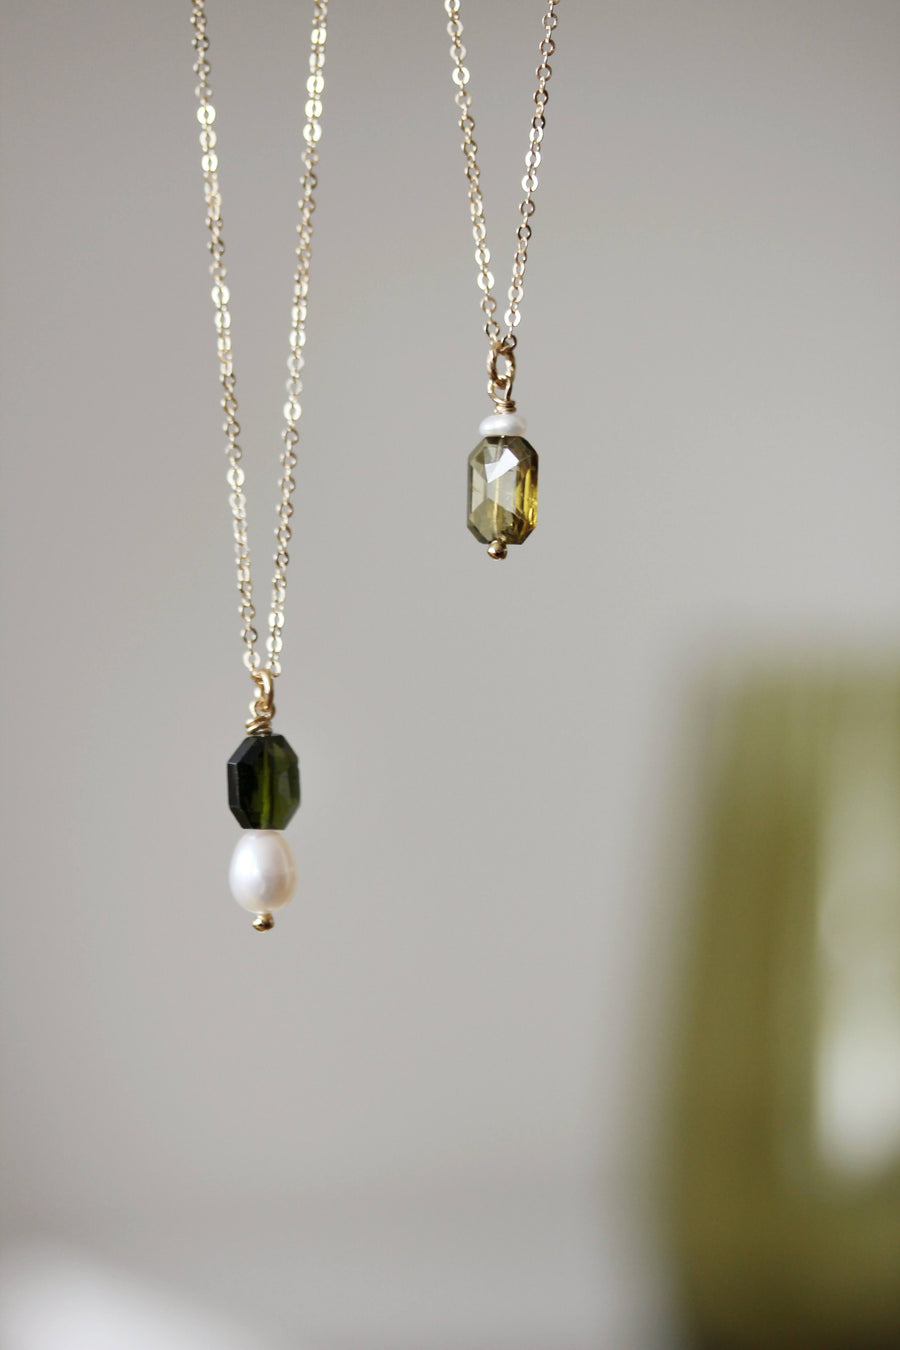 One of a Kind - Olive Necklace